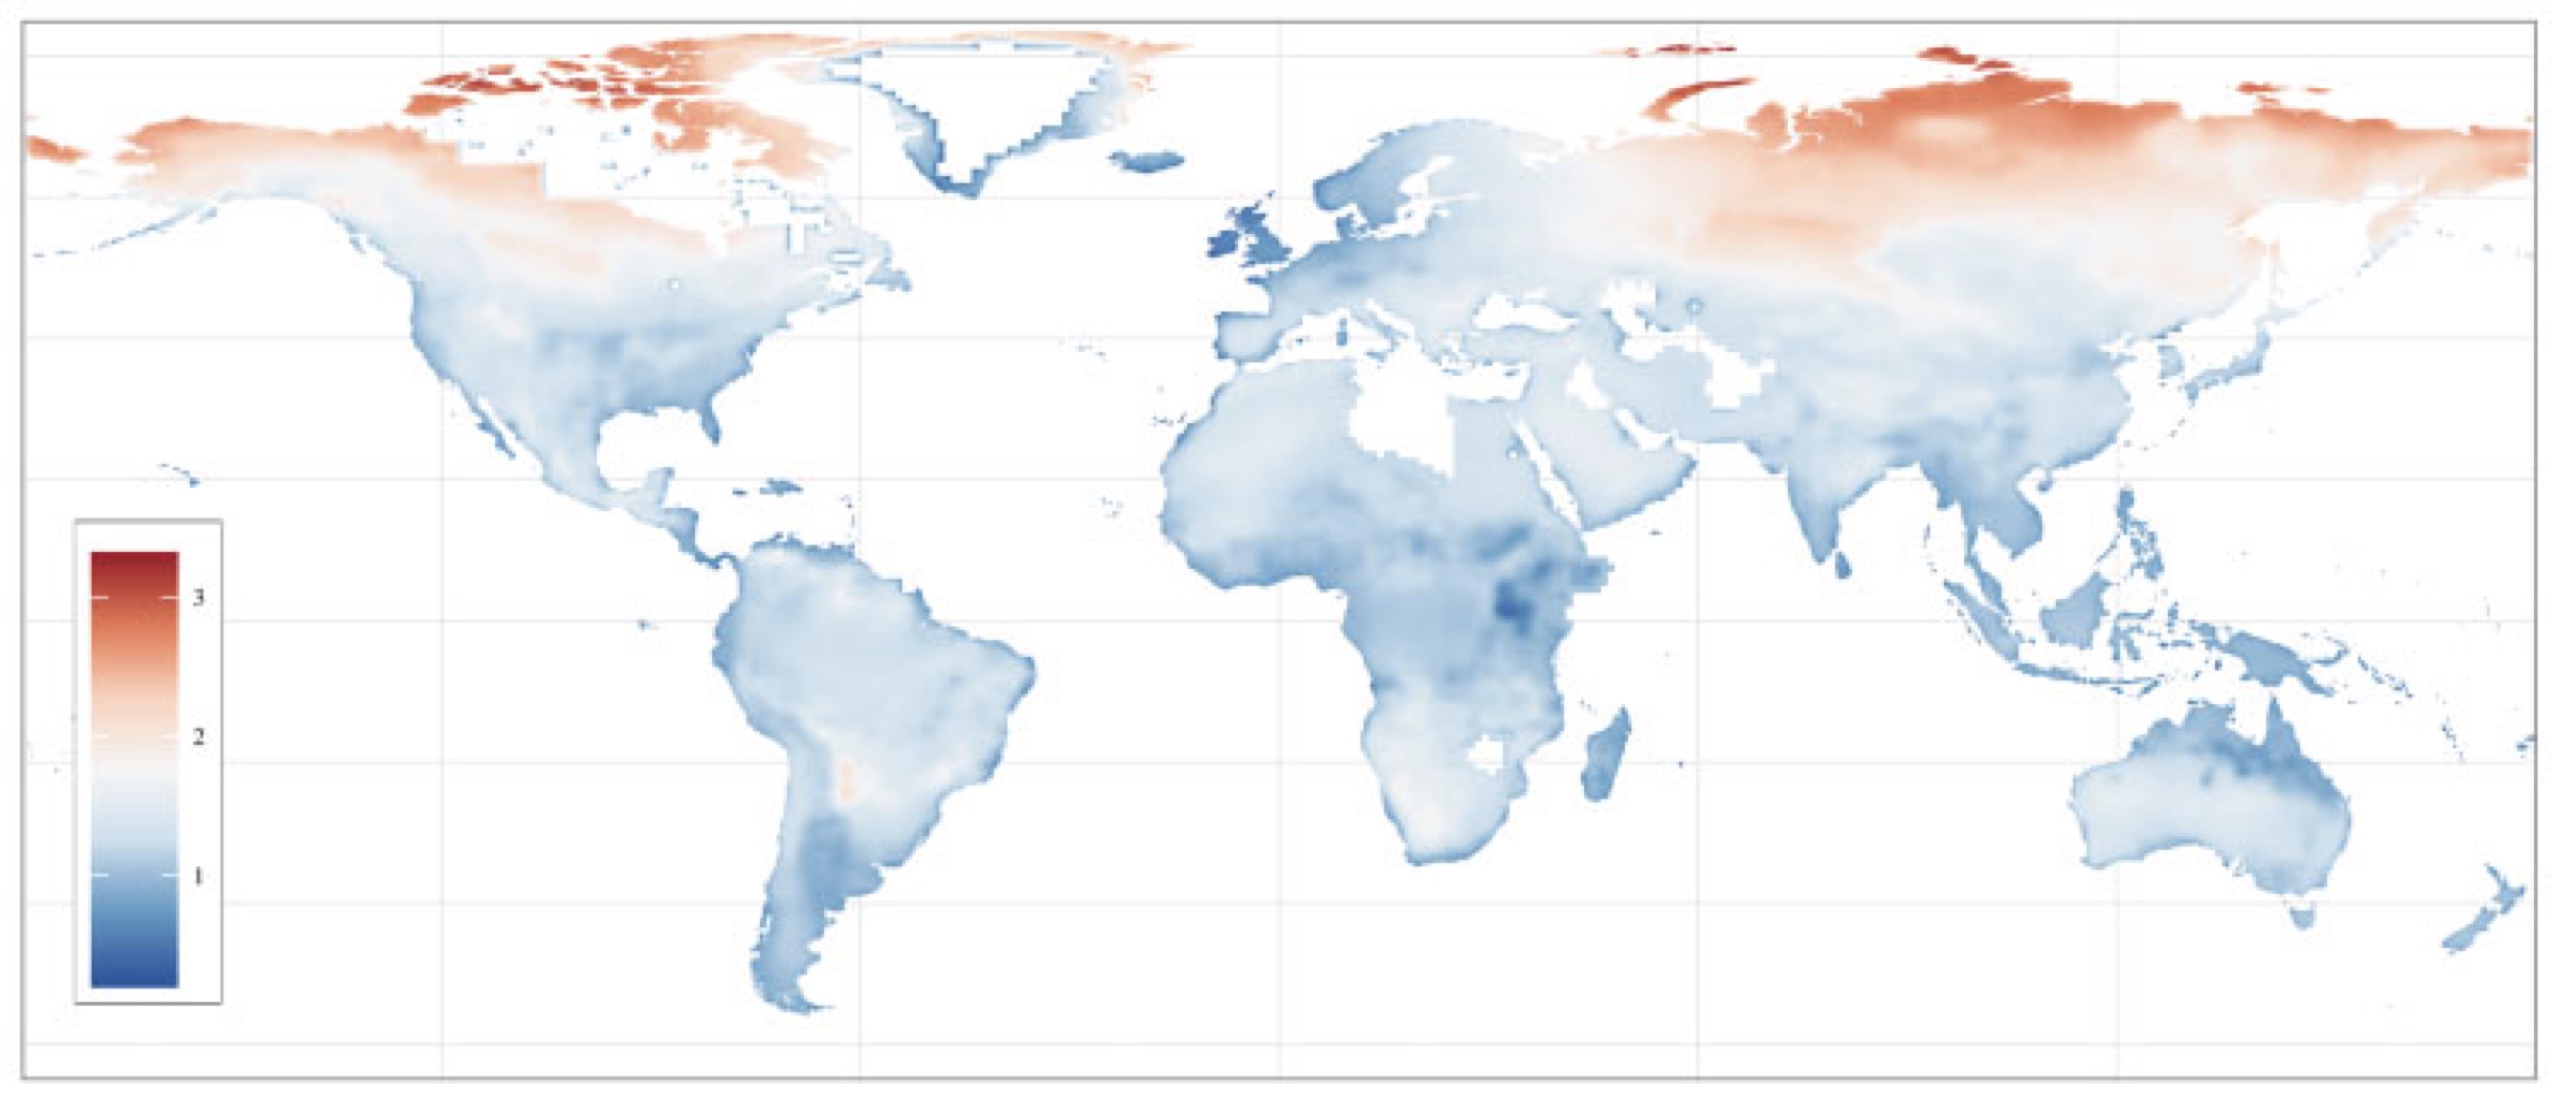 A map showing the predicted change in temperature by 2200